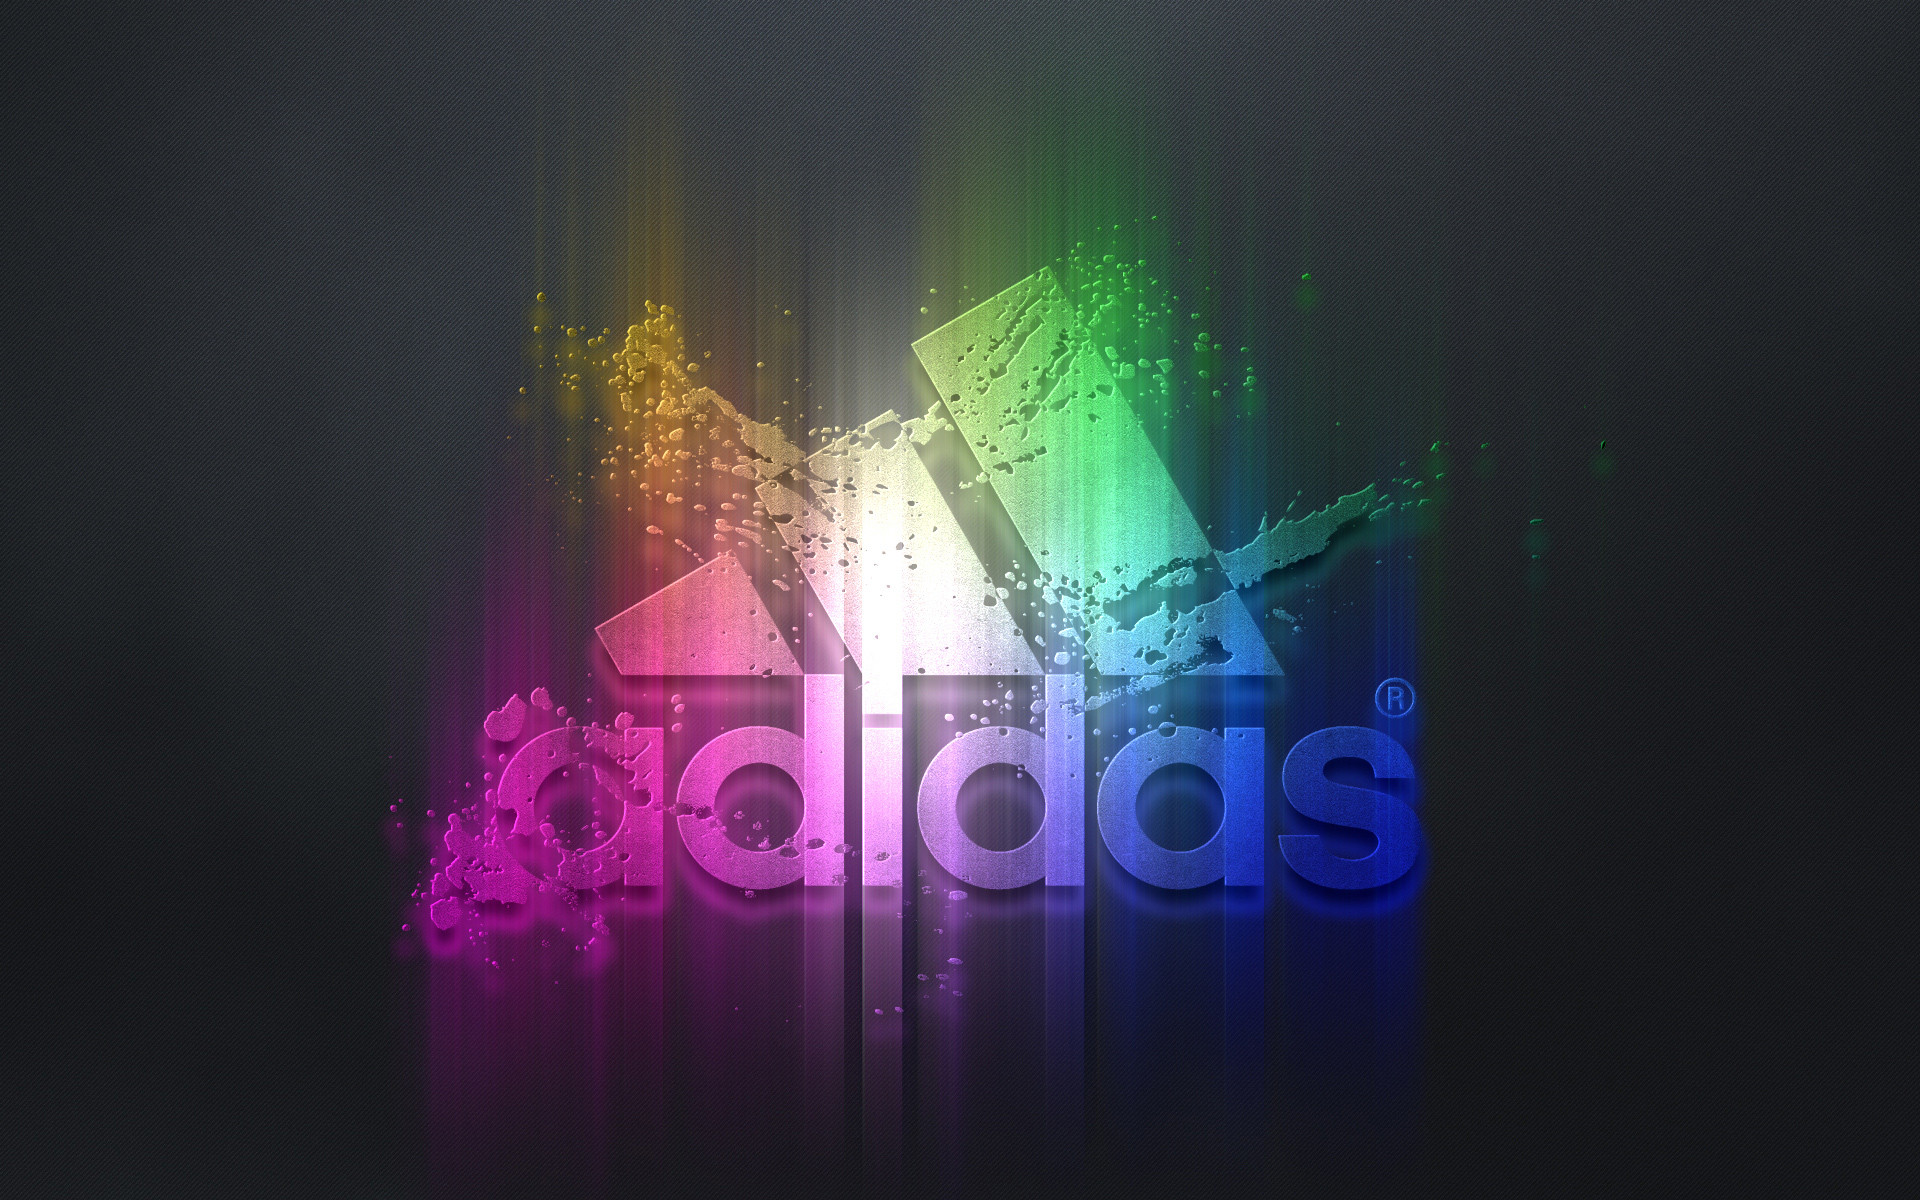 1920x1200 adidas background for desktop wallpaper 1920 x 1200 px 692 31 kb messi 2016  tumblr colorful soccer